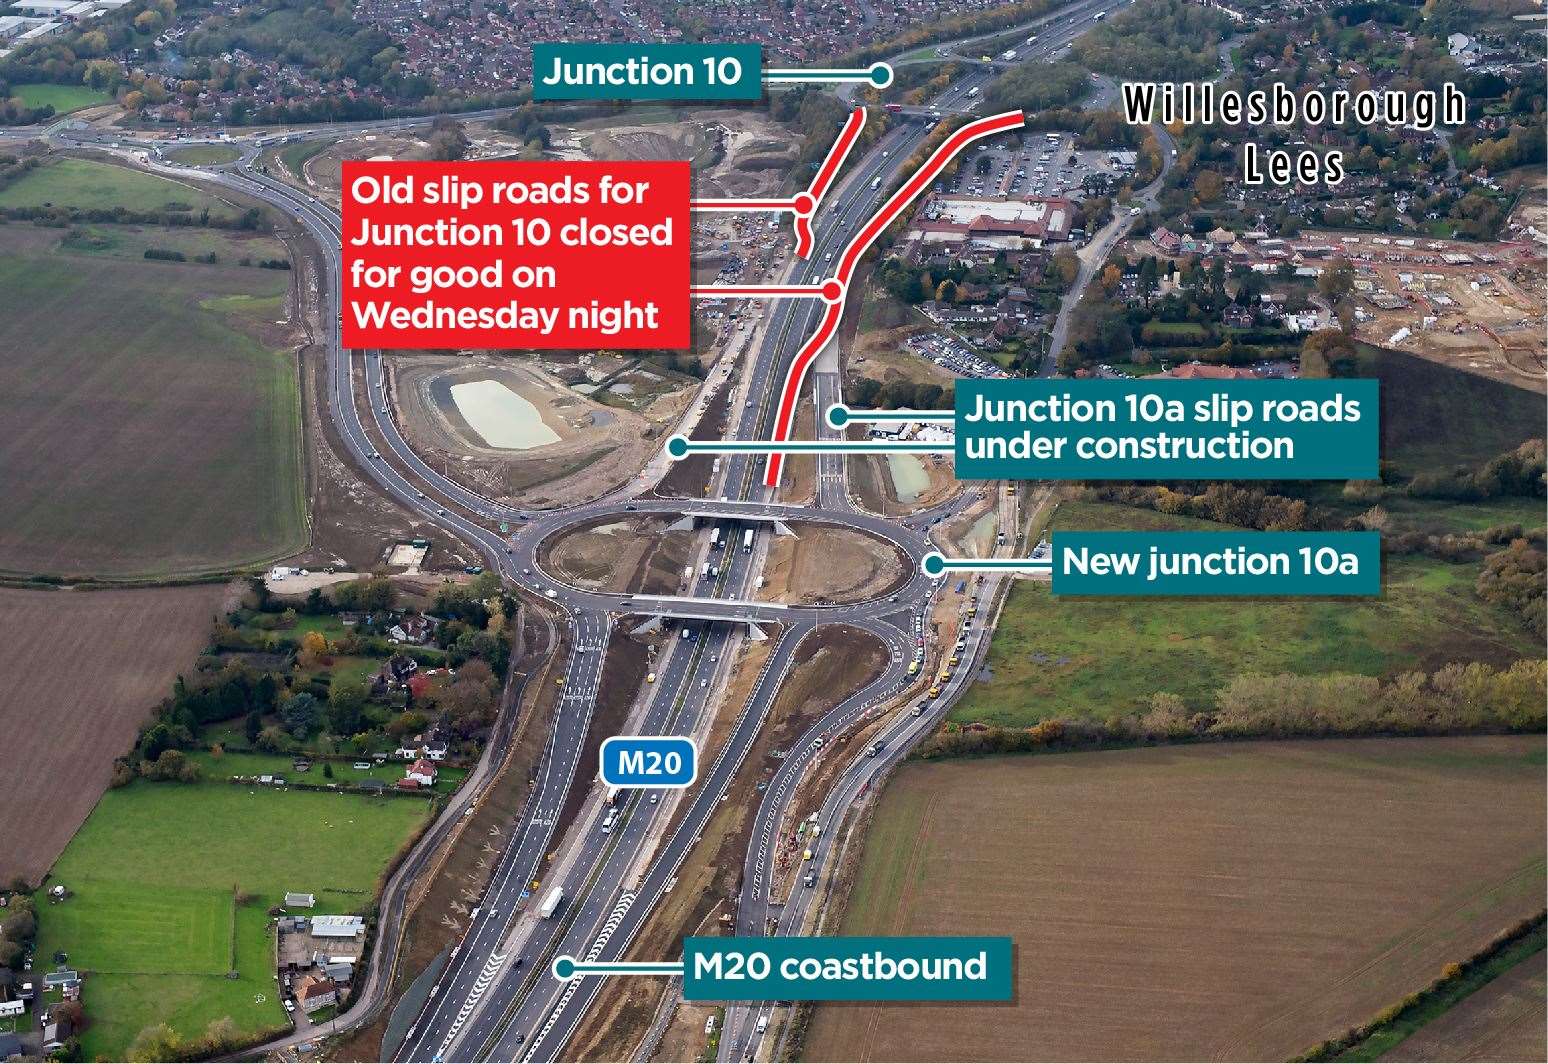 The coastbound on-slip and London-bound off-slip at Junction 10 closed on Wednesday night